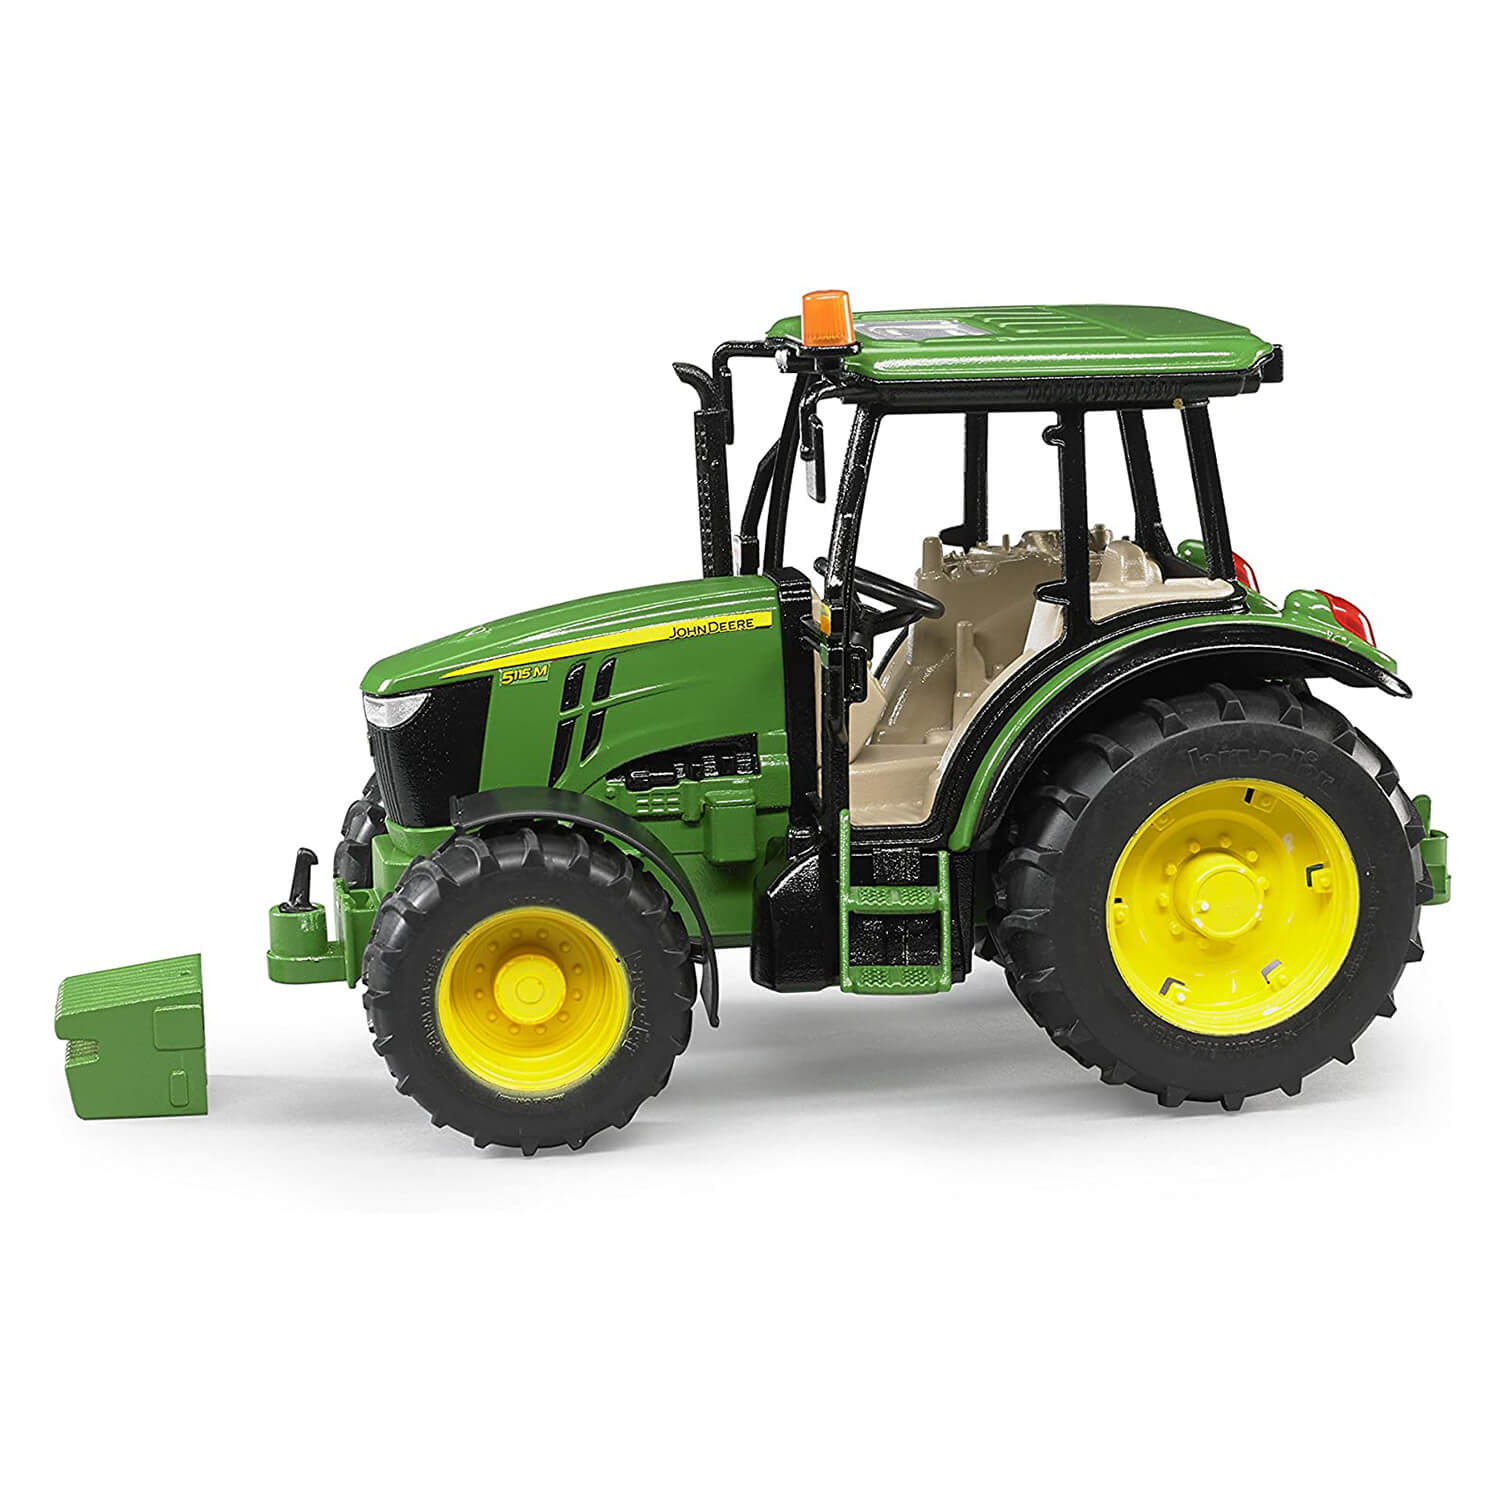 Side view of the Bruder Pro Series John Deere 5115M 1:16 Scale Vehicle.